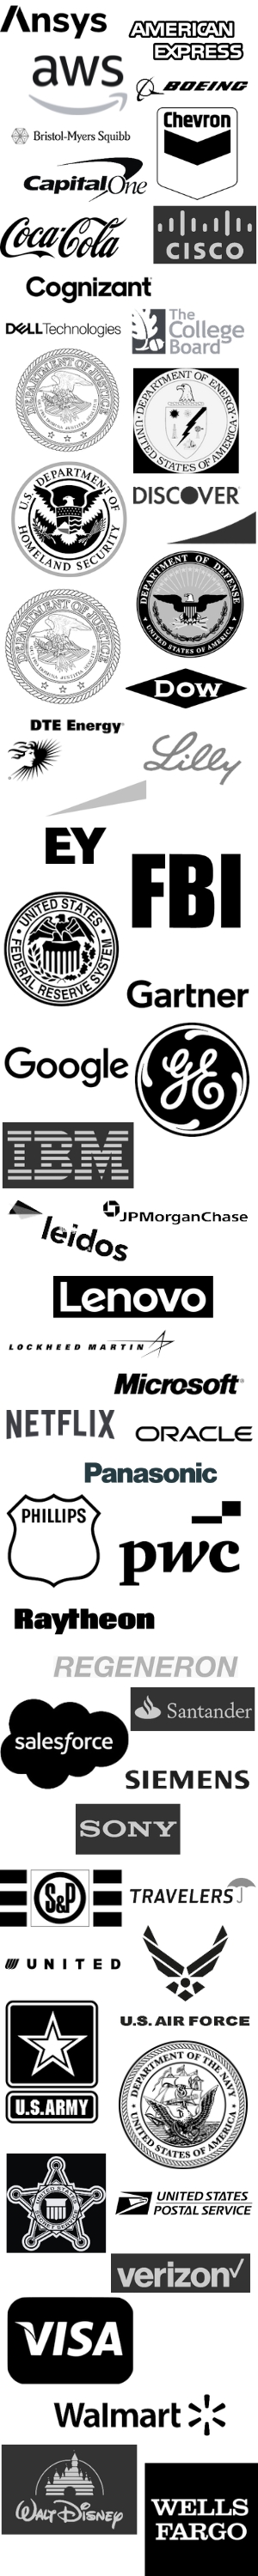 Graphic with the logos of companies who have been recent partners of the CISO program.